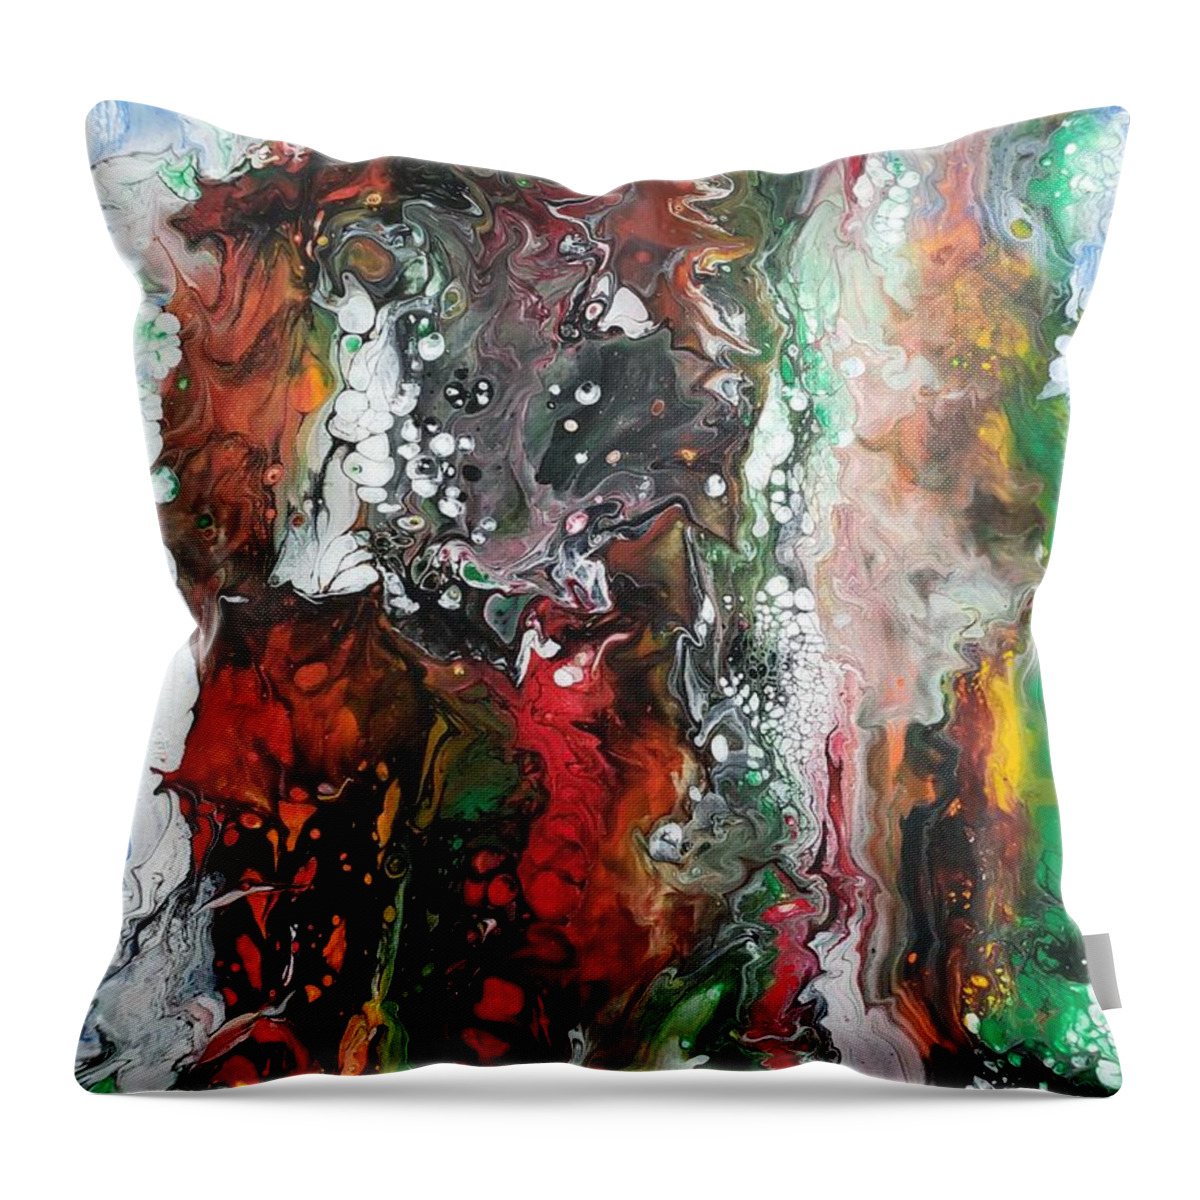 Dragons Throw Pillow featuring the painting HIdden Dragon by Michelle Stevens